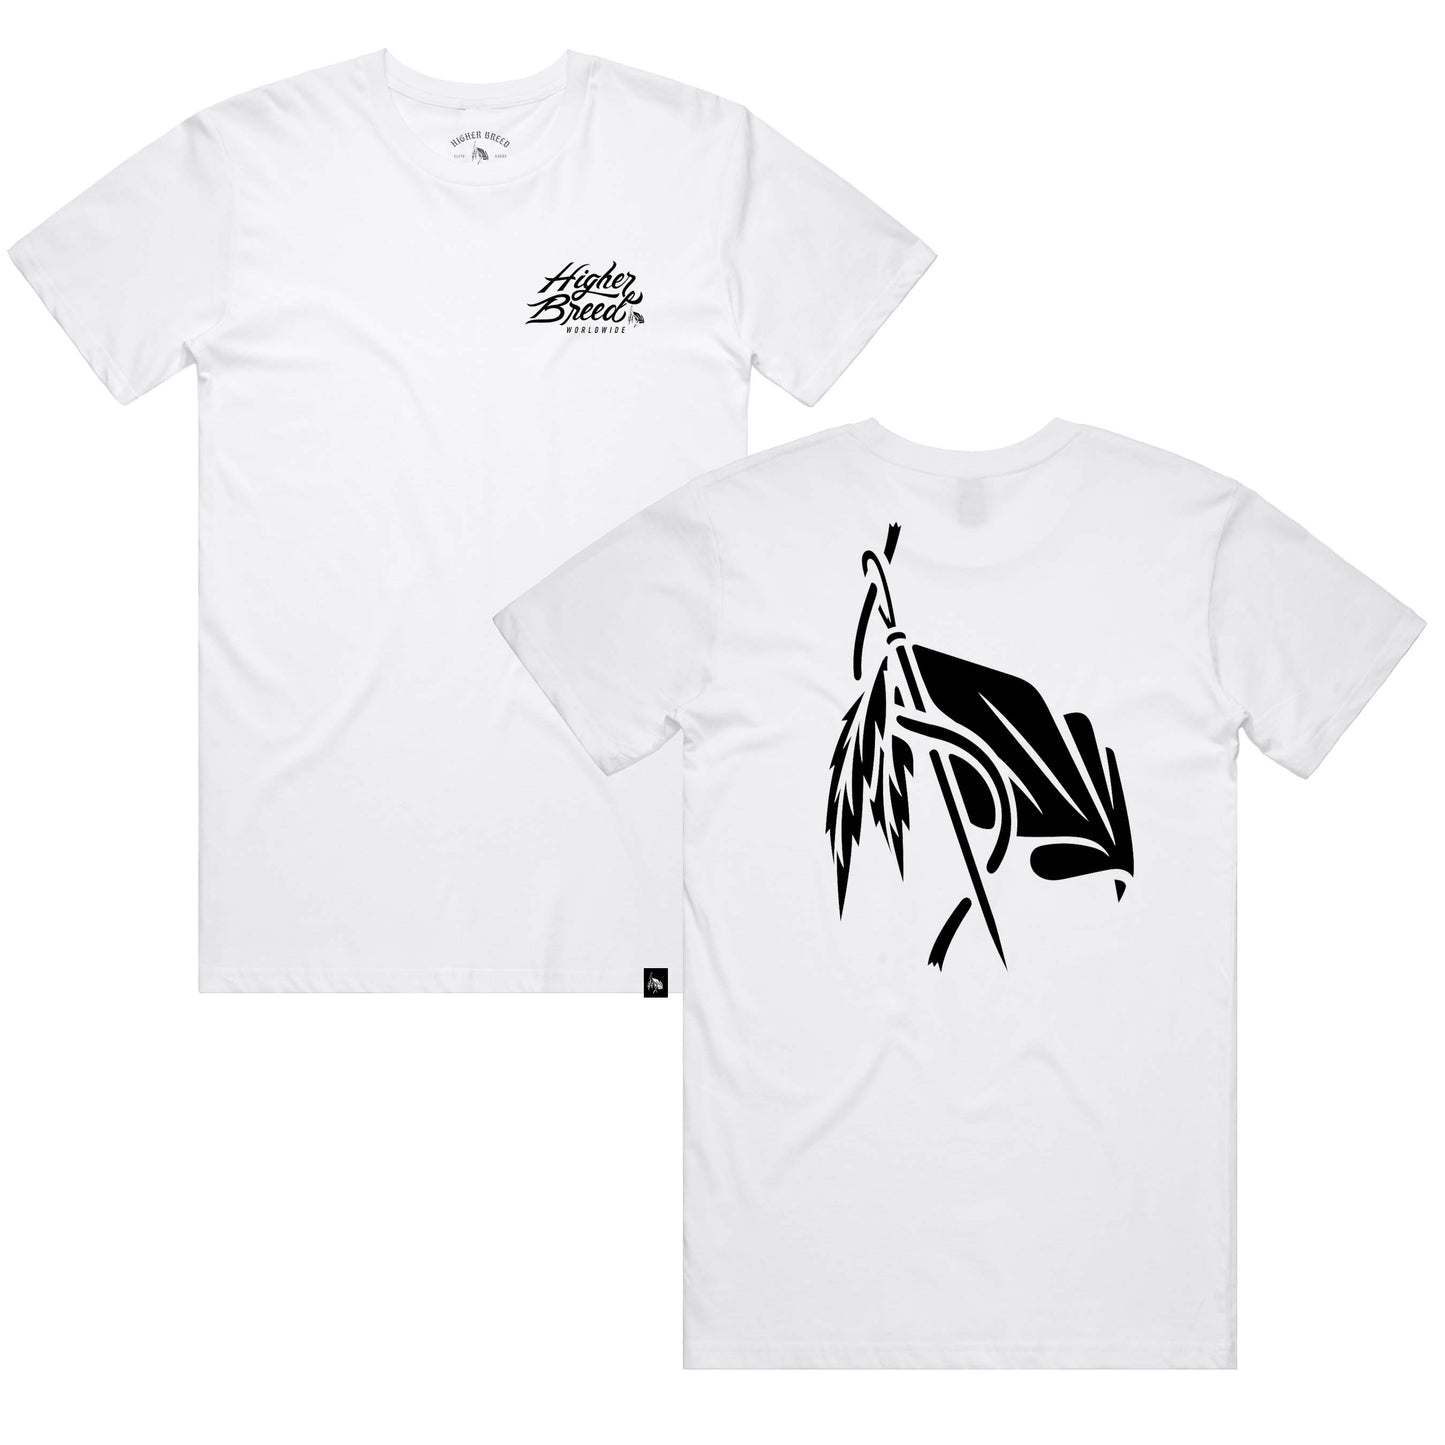 Higher Breed - Icon - T-Shirt (White)